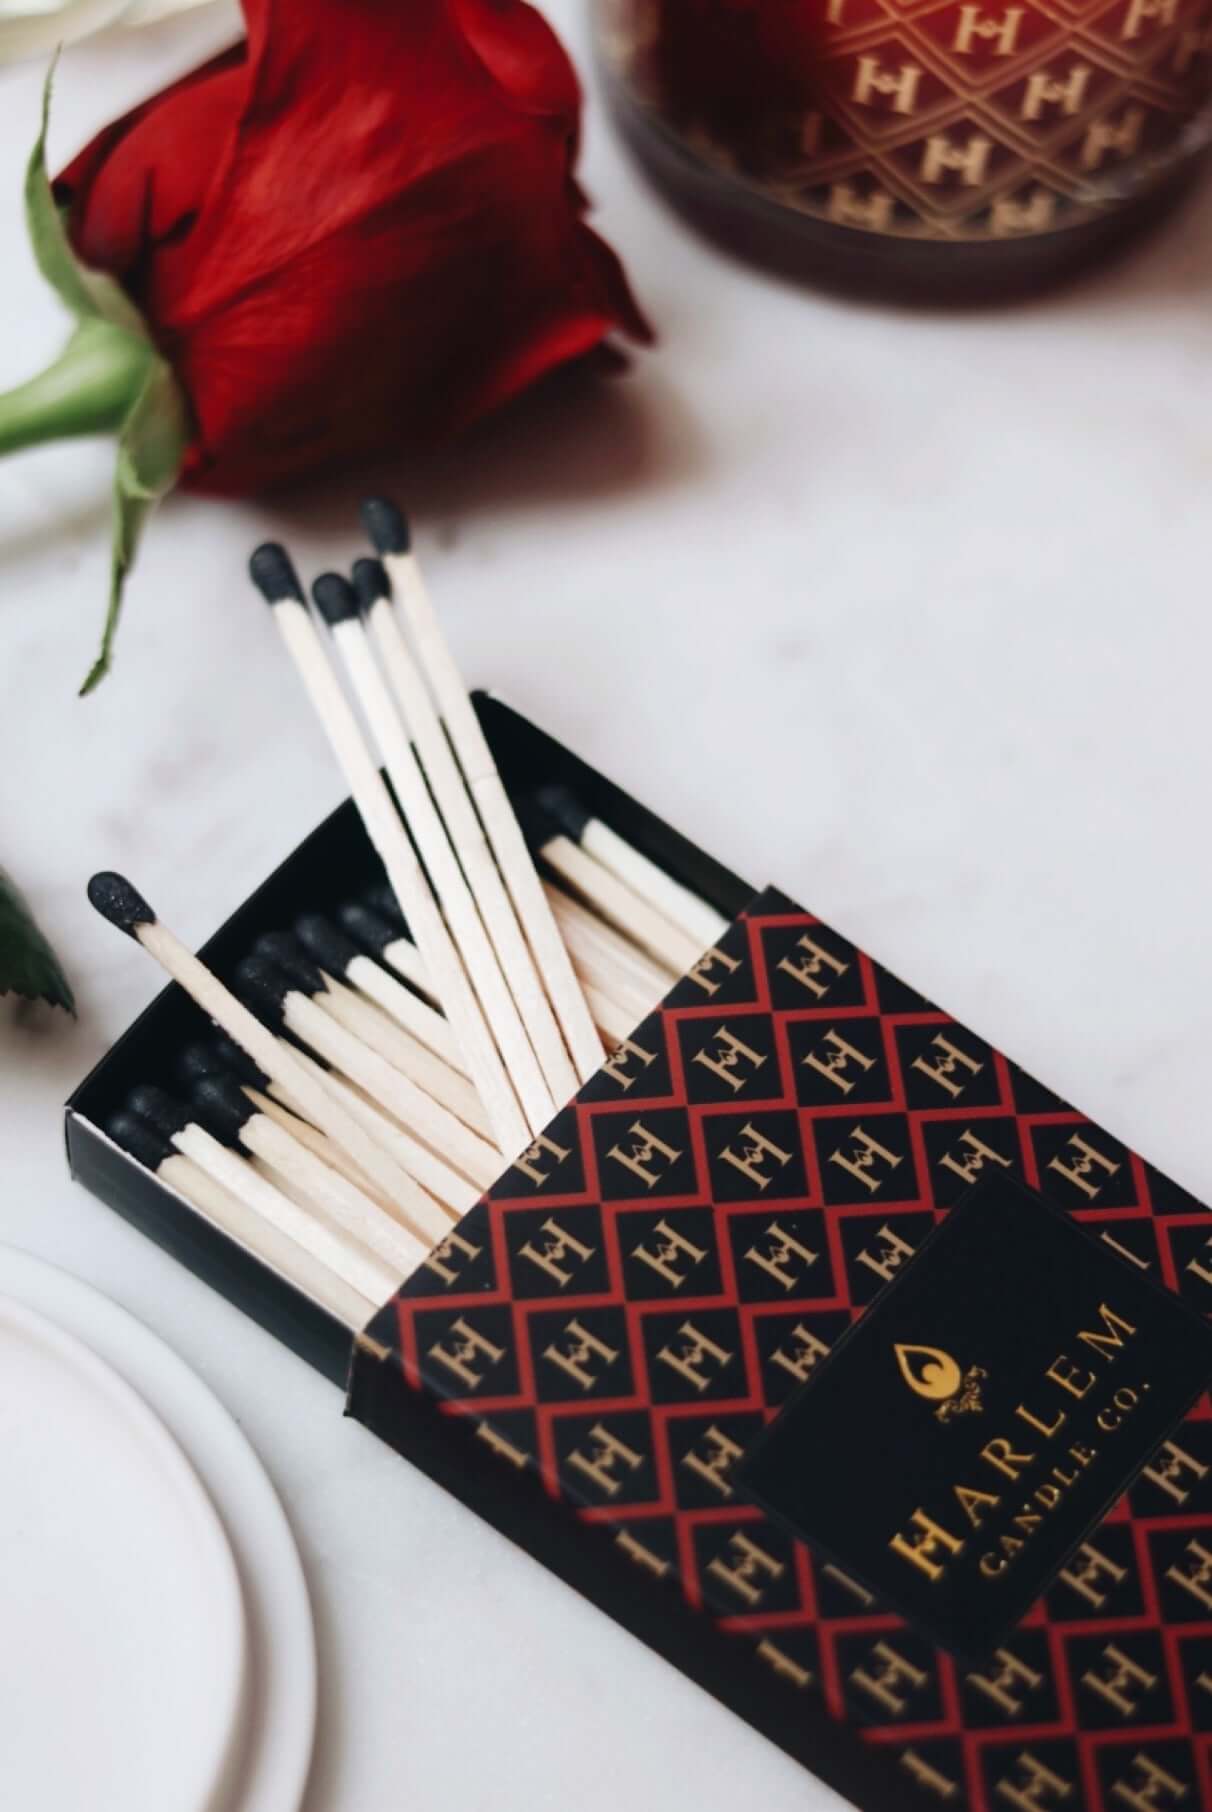 Red, black and gold Match box containing 3 inch matches with black tips.  The box has the Harlem H pattern in an art deco style printed on the box.  The image is on next to flowers.